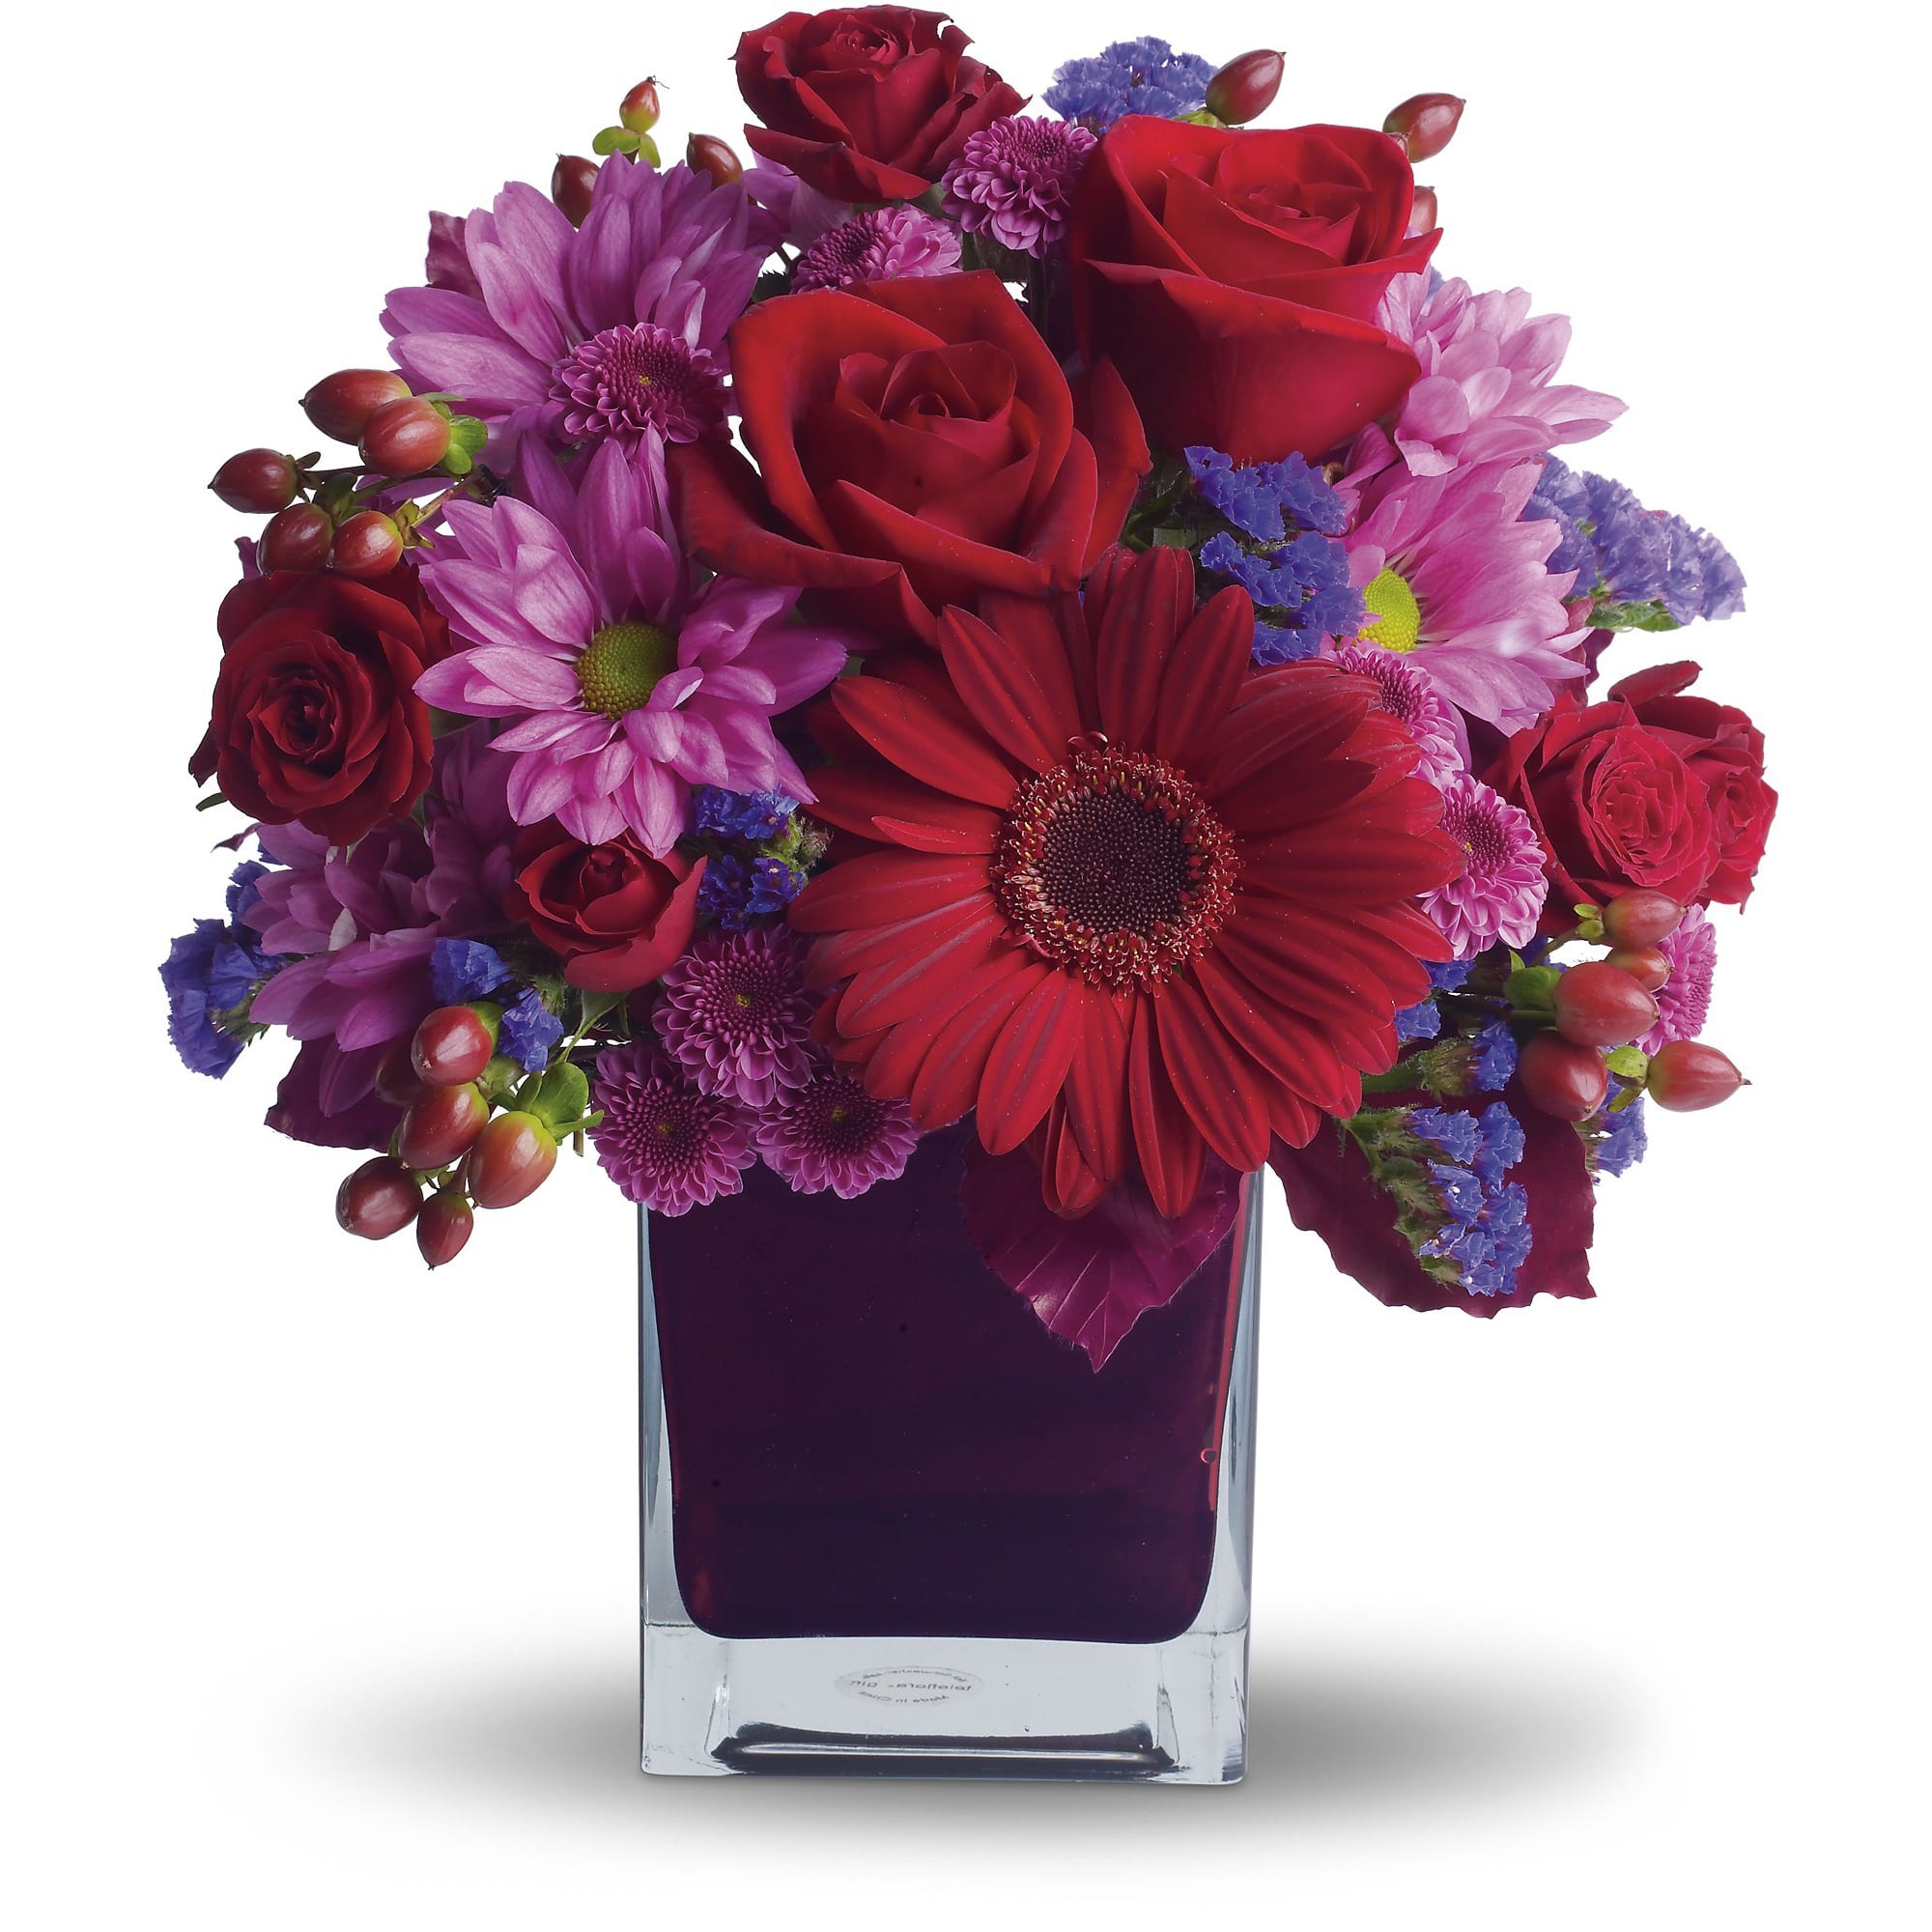 It's My Party A023 - The only crying that this plum party arrangement might inspire are tears of joy! So fabulous. So fun. So fall with its jewel-toned modern cube that's chock full of gorgeous red, purple and perfect flowers.